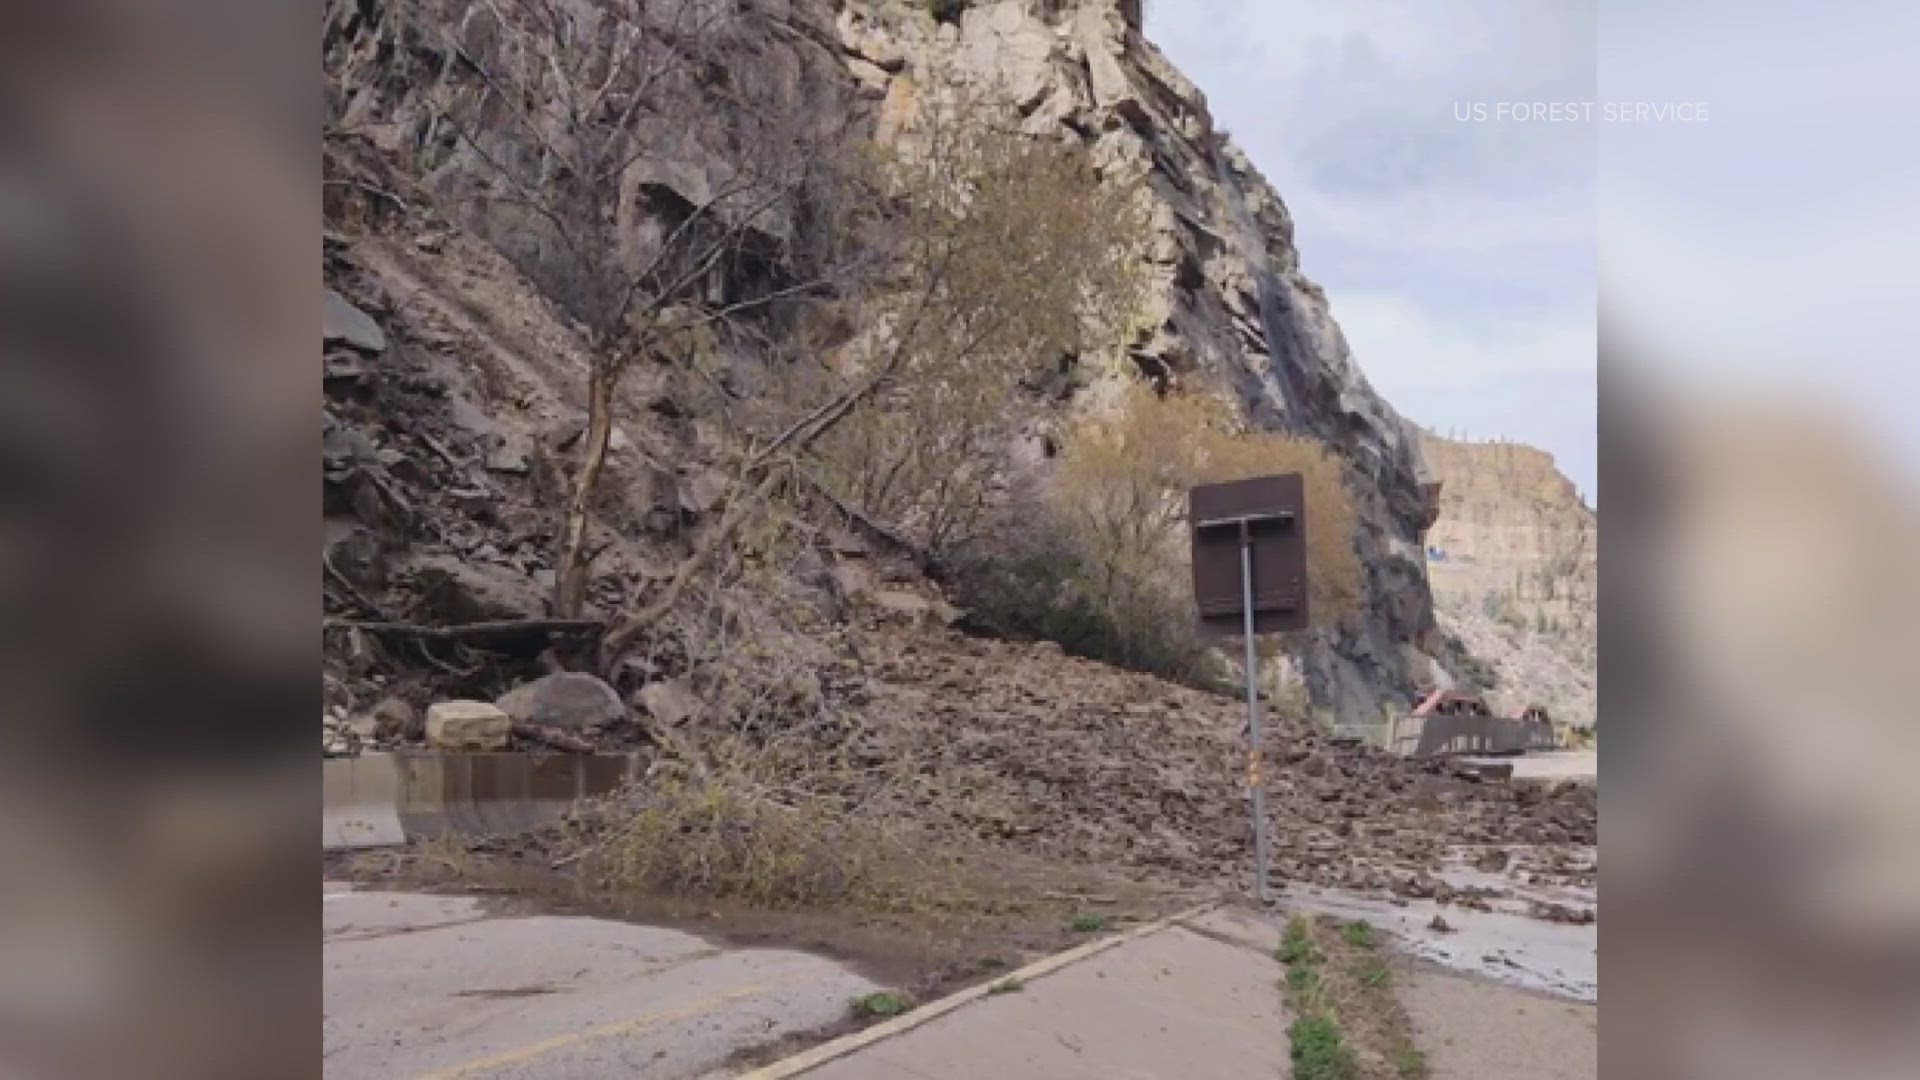 No one was injured or trapped behind the debris flow, the U.S. Forest Service said.